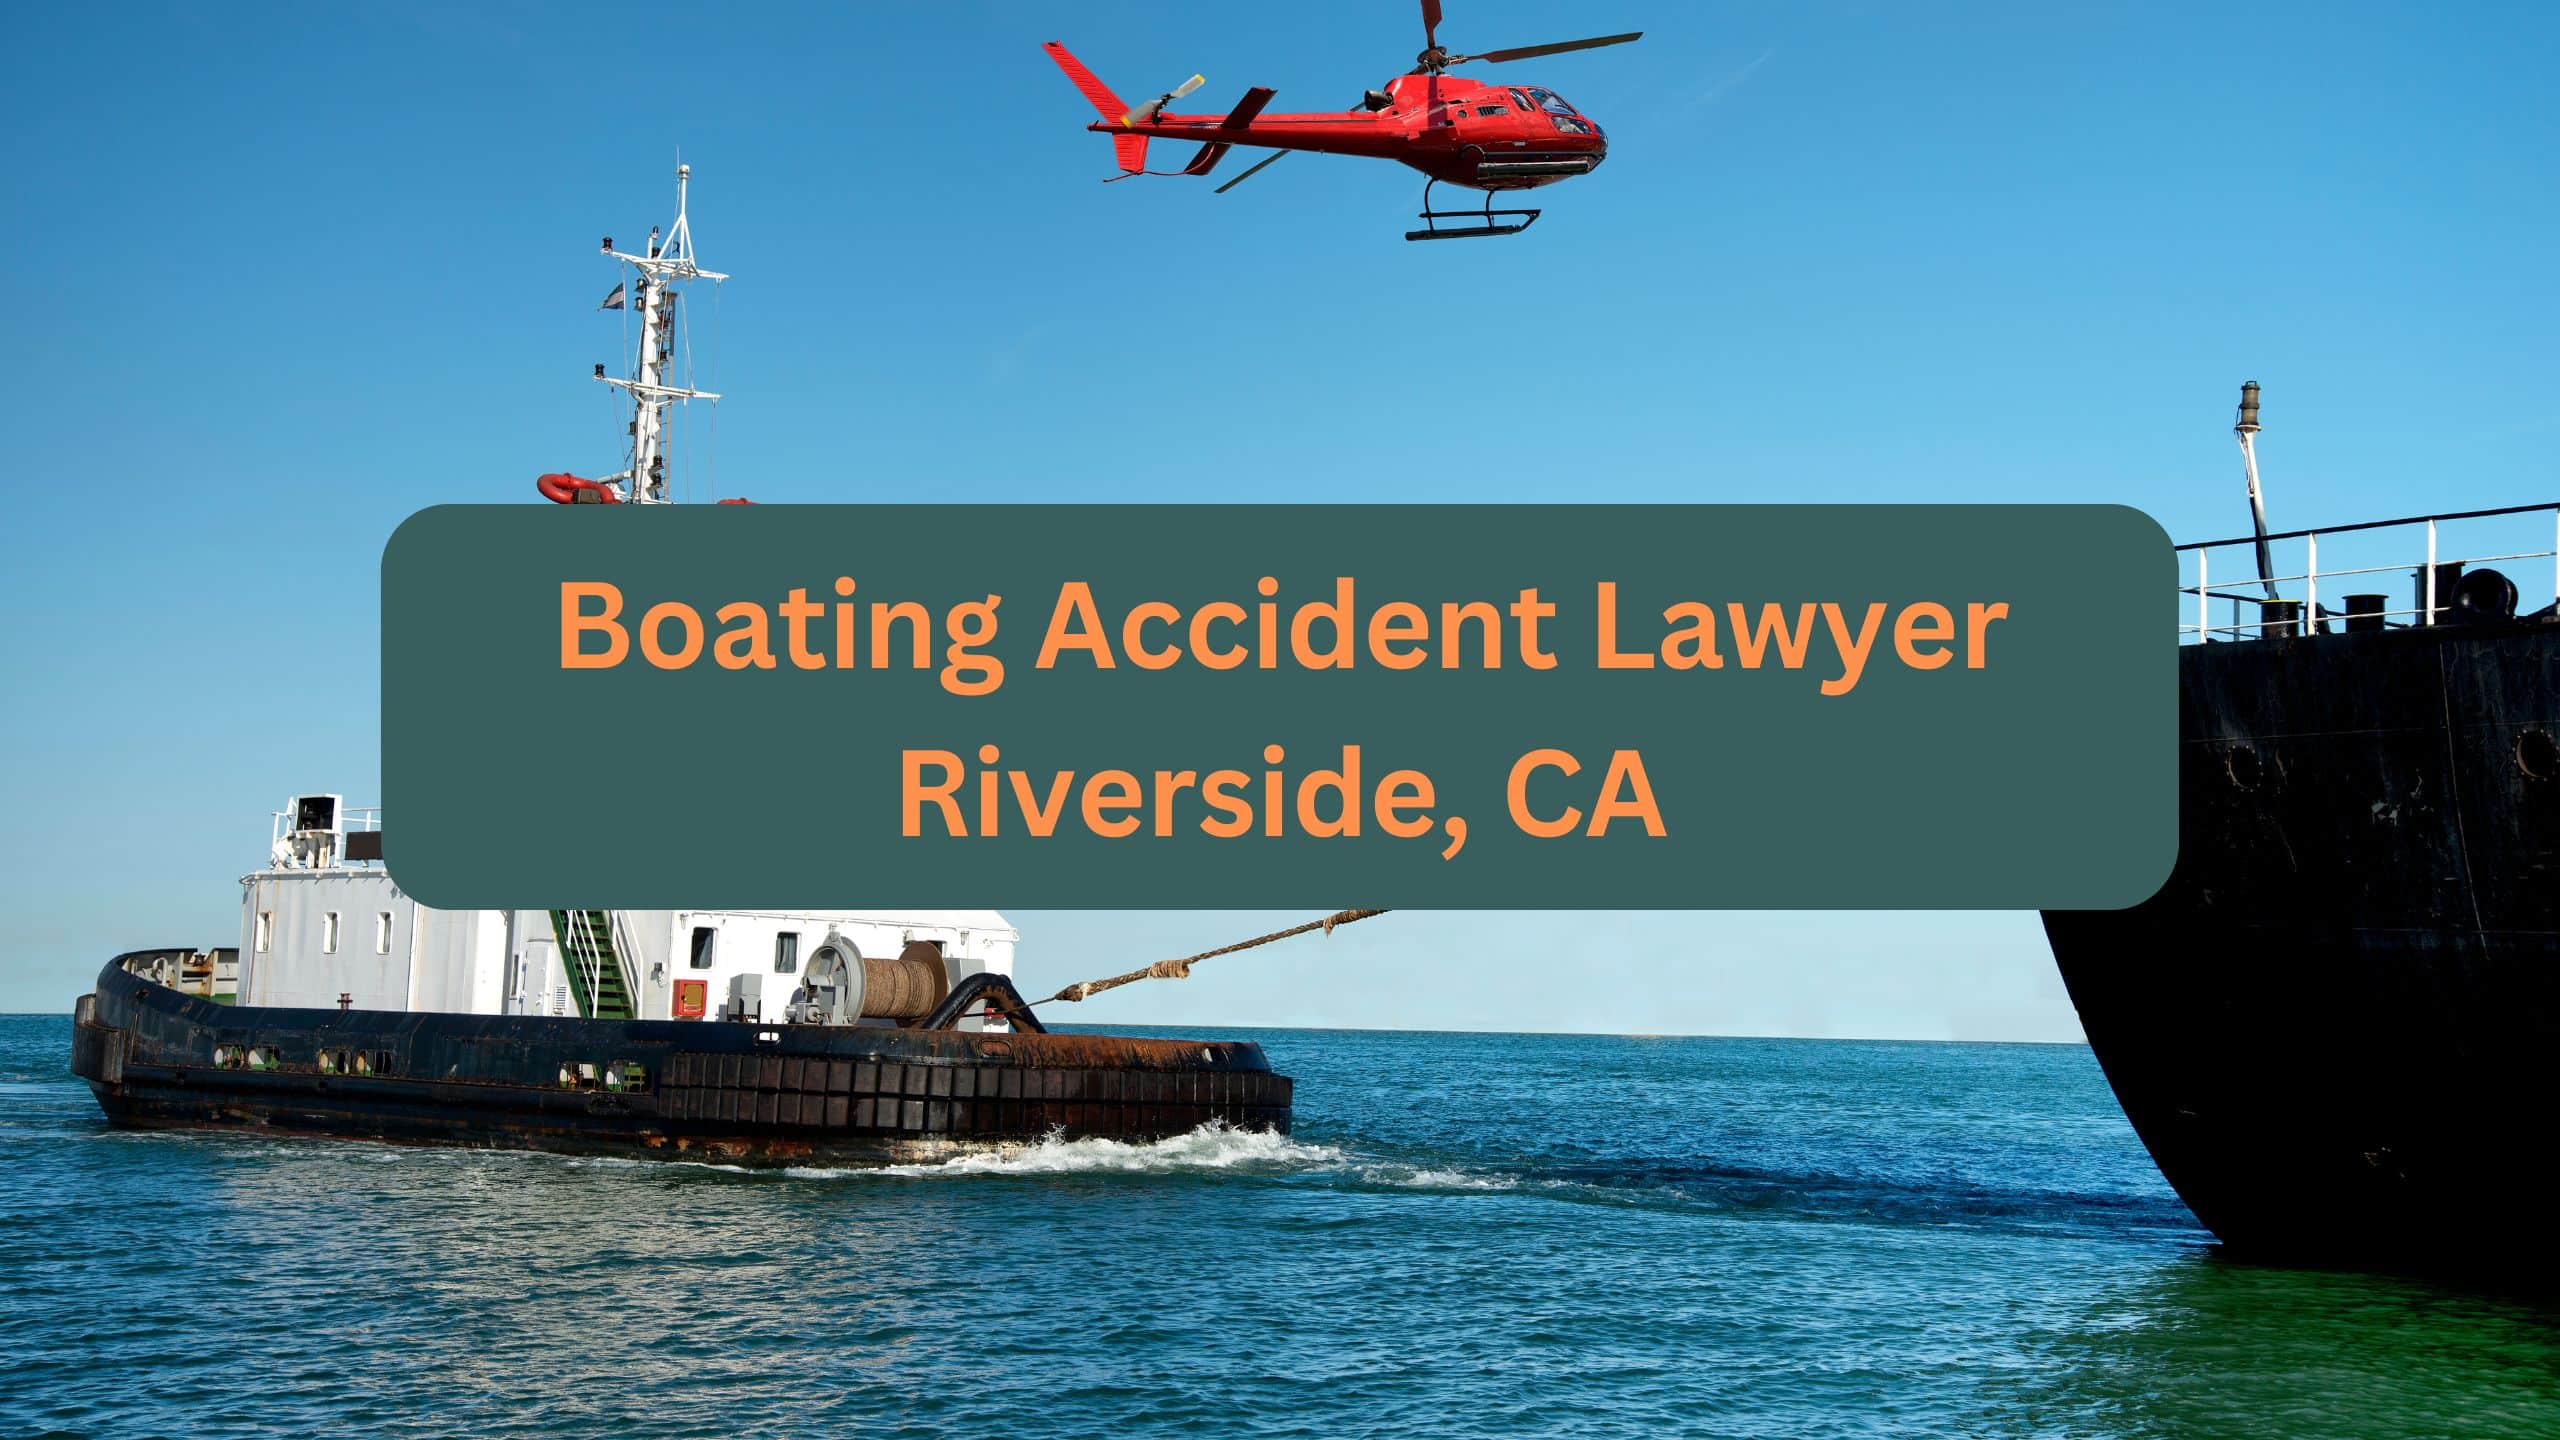 Boating Accident Lawyer Riverside